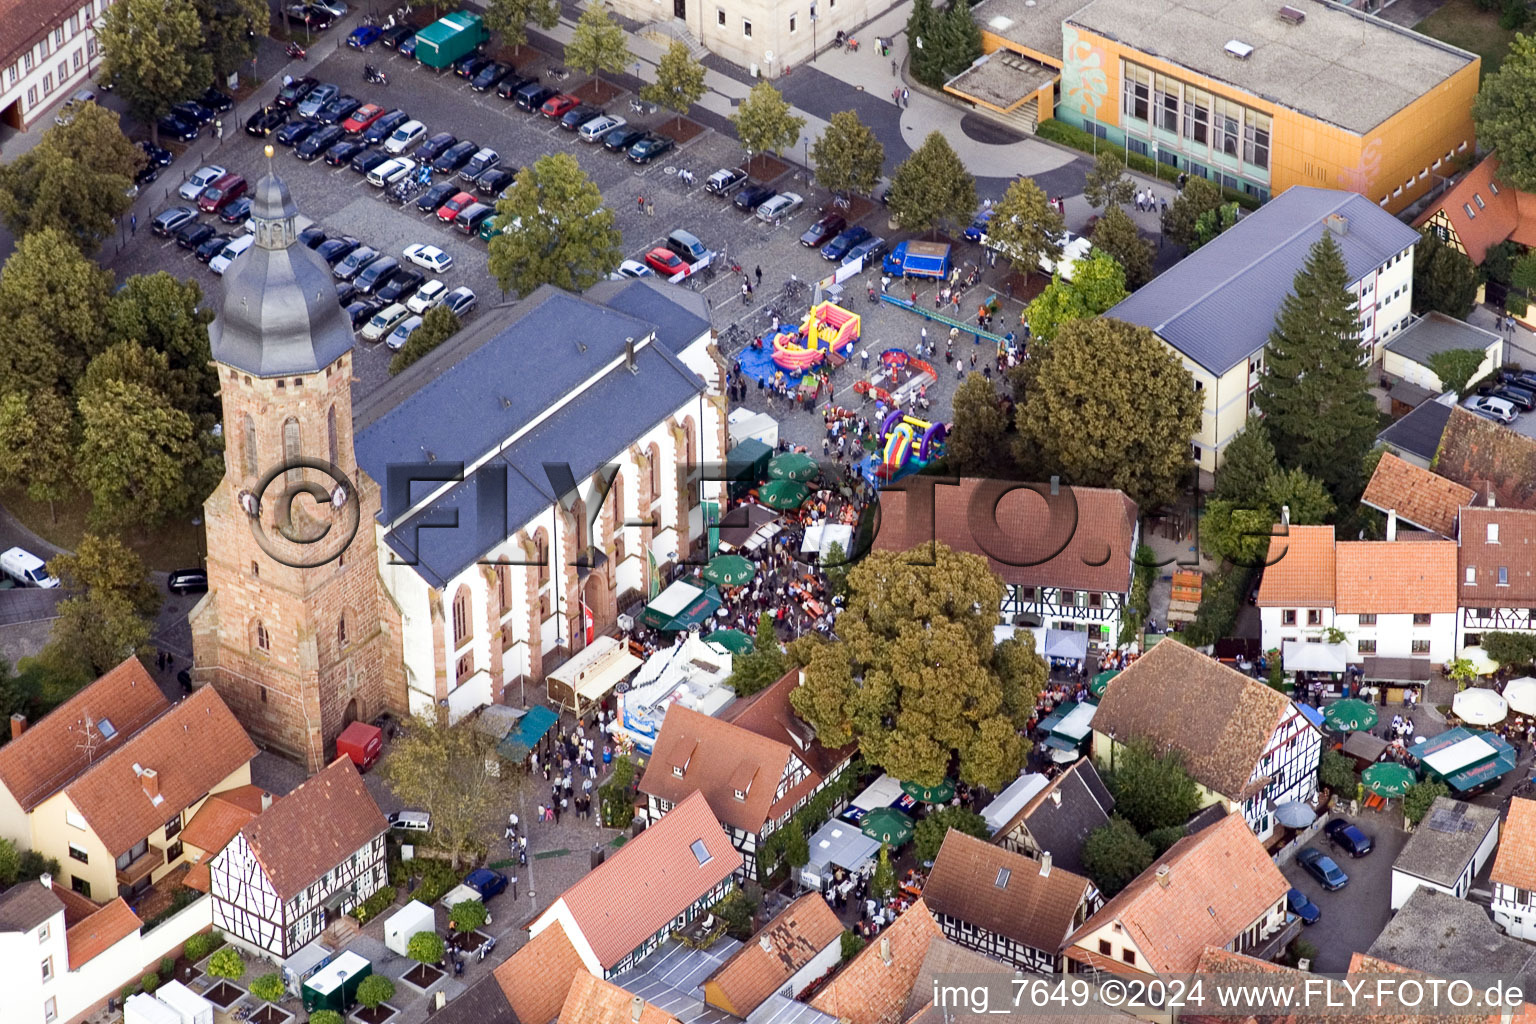 Aerial view of Church building in of  church at the market in Old Town- center of downtown in Kandel in the state Rhineland-Palatinate